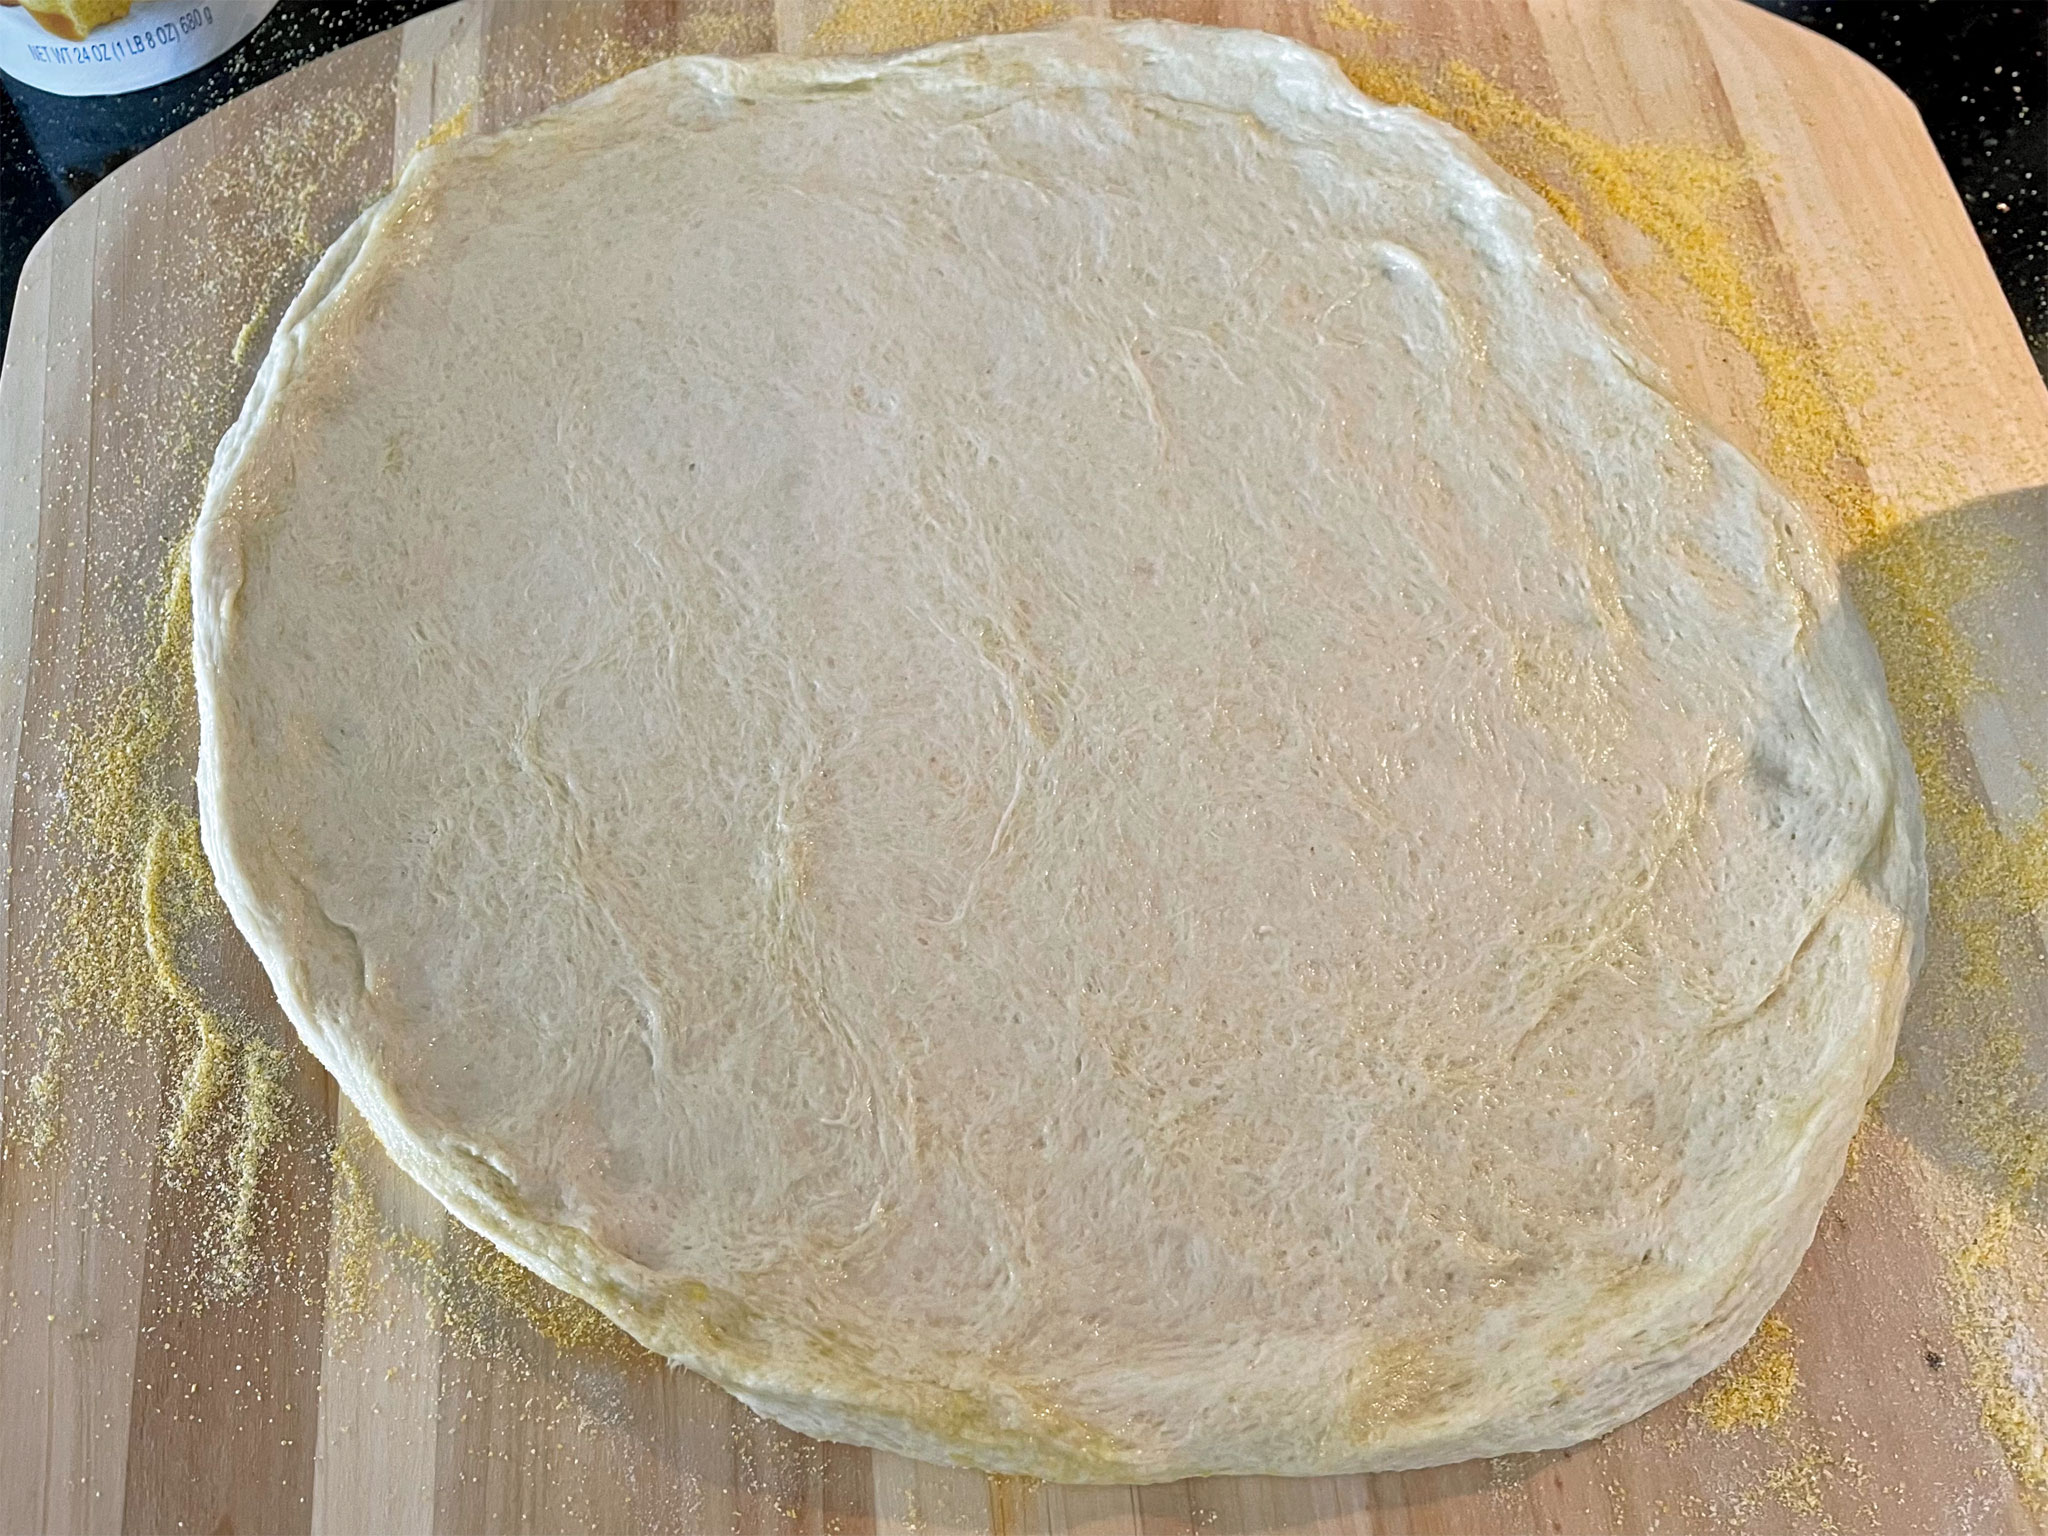 How to Form Pizza Dough by Hand